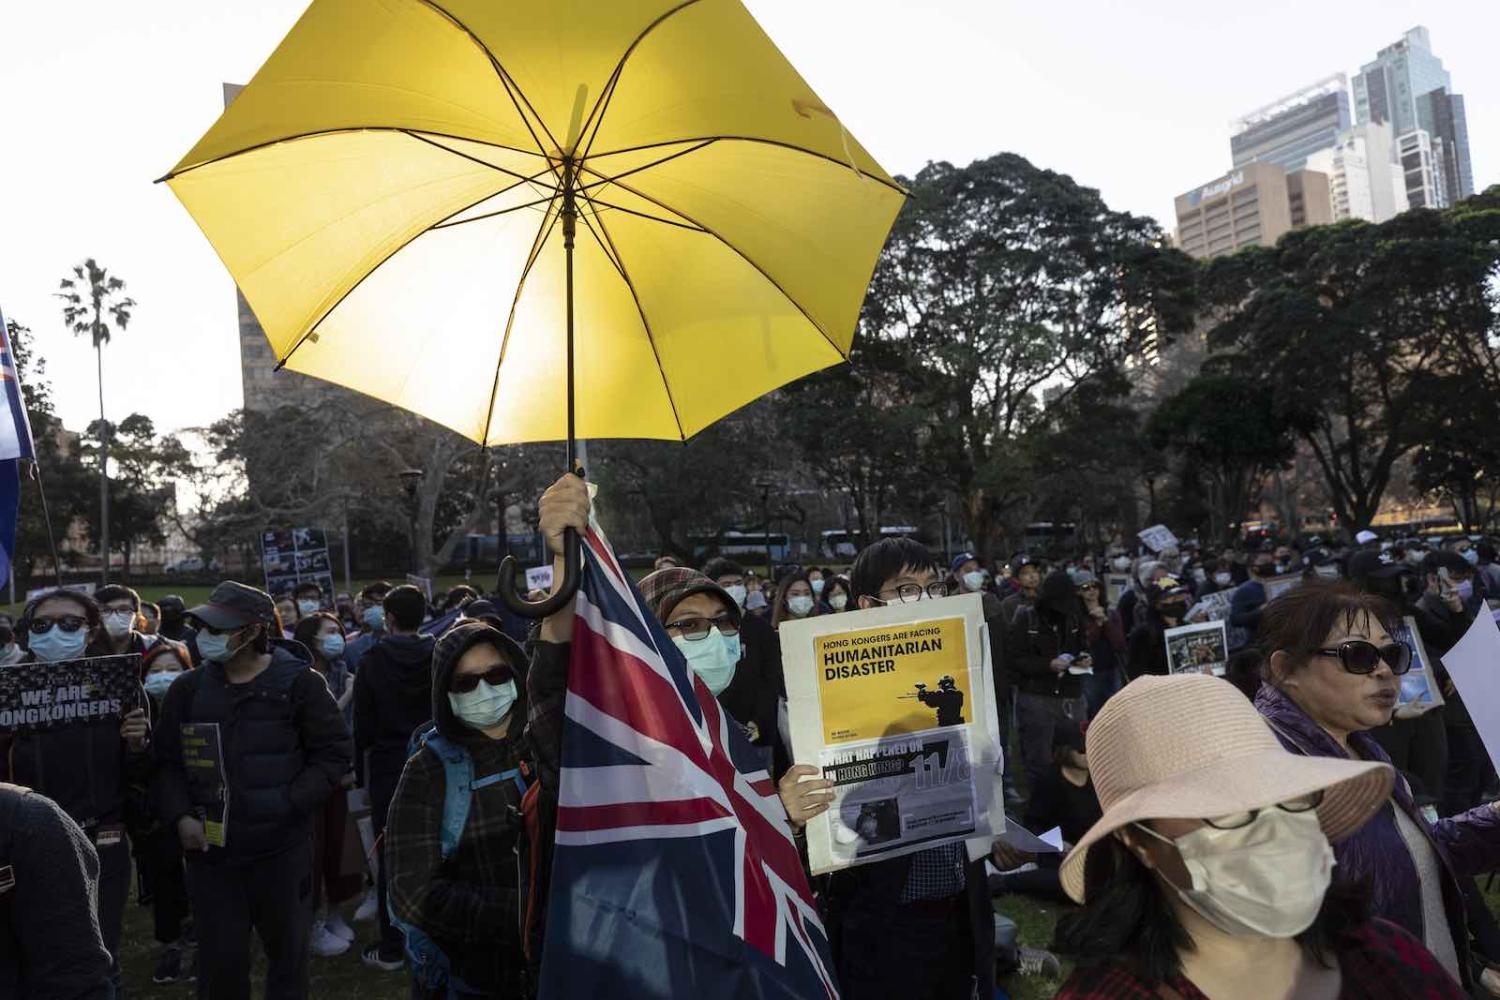 Demonstration in Sydney in support of Hong Kong democracy movement, 18 August 2019 (Photo: Brook Mitchell/Getty Images)